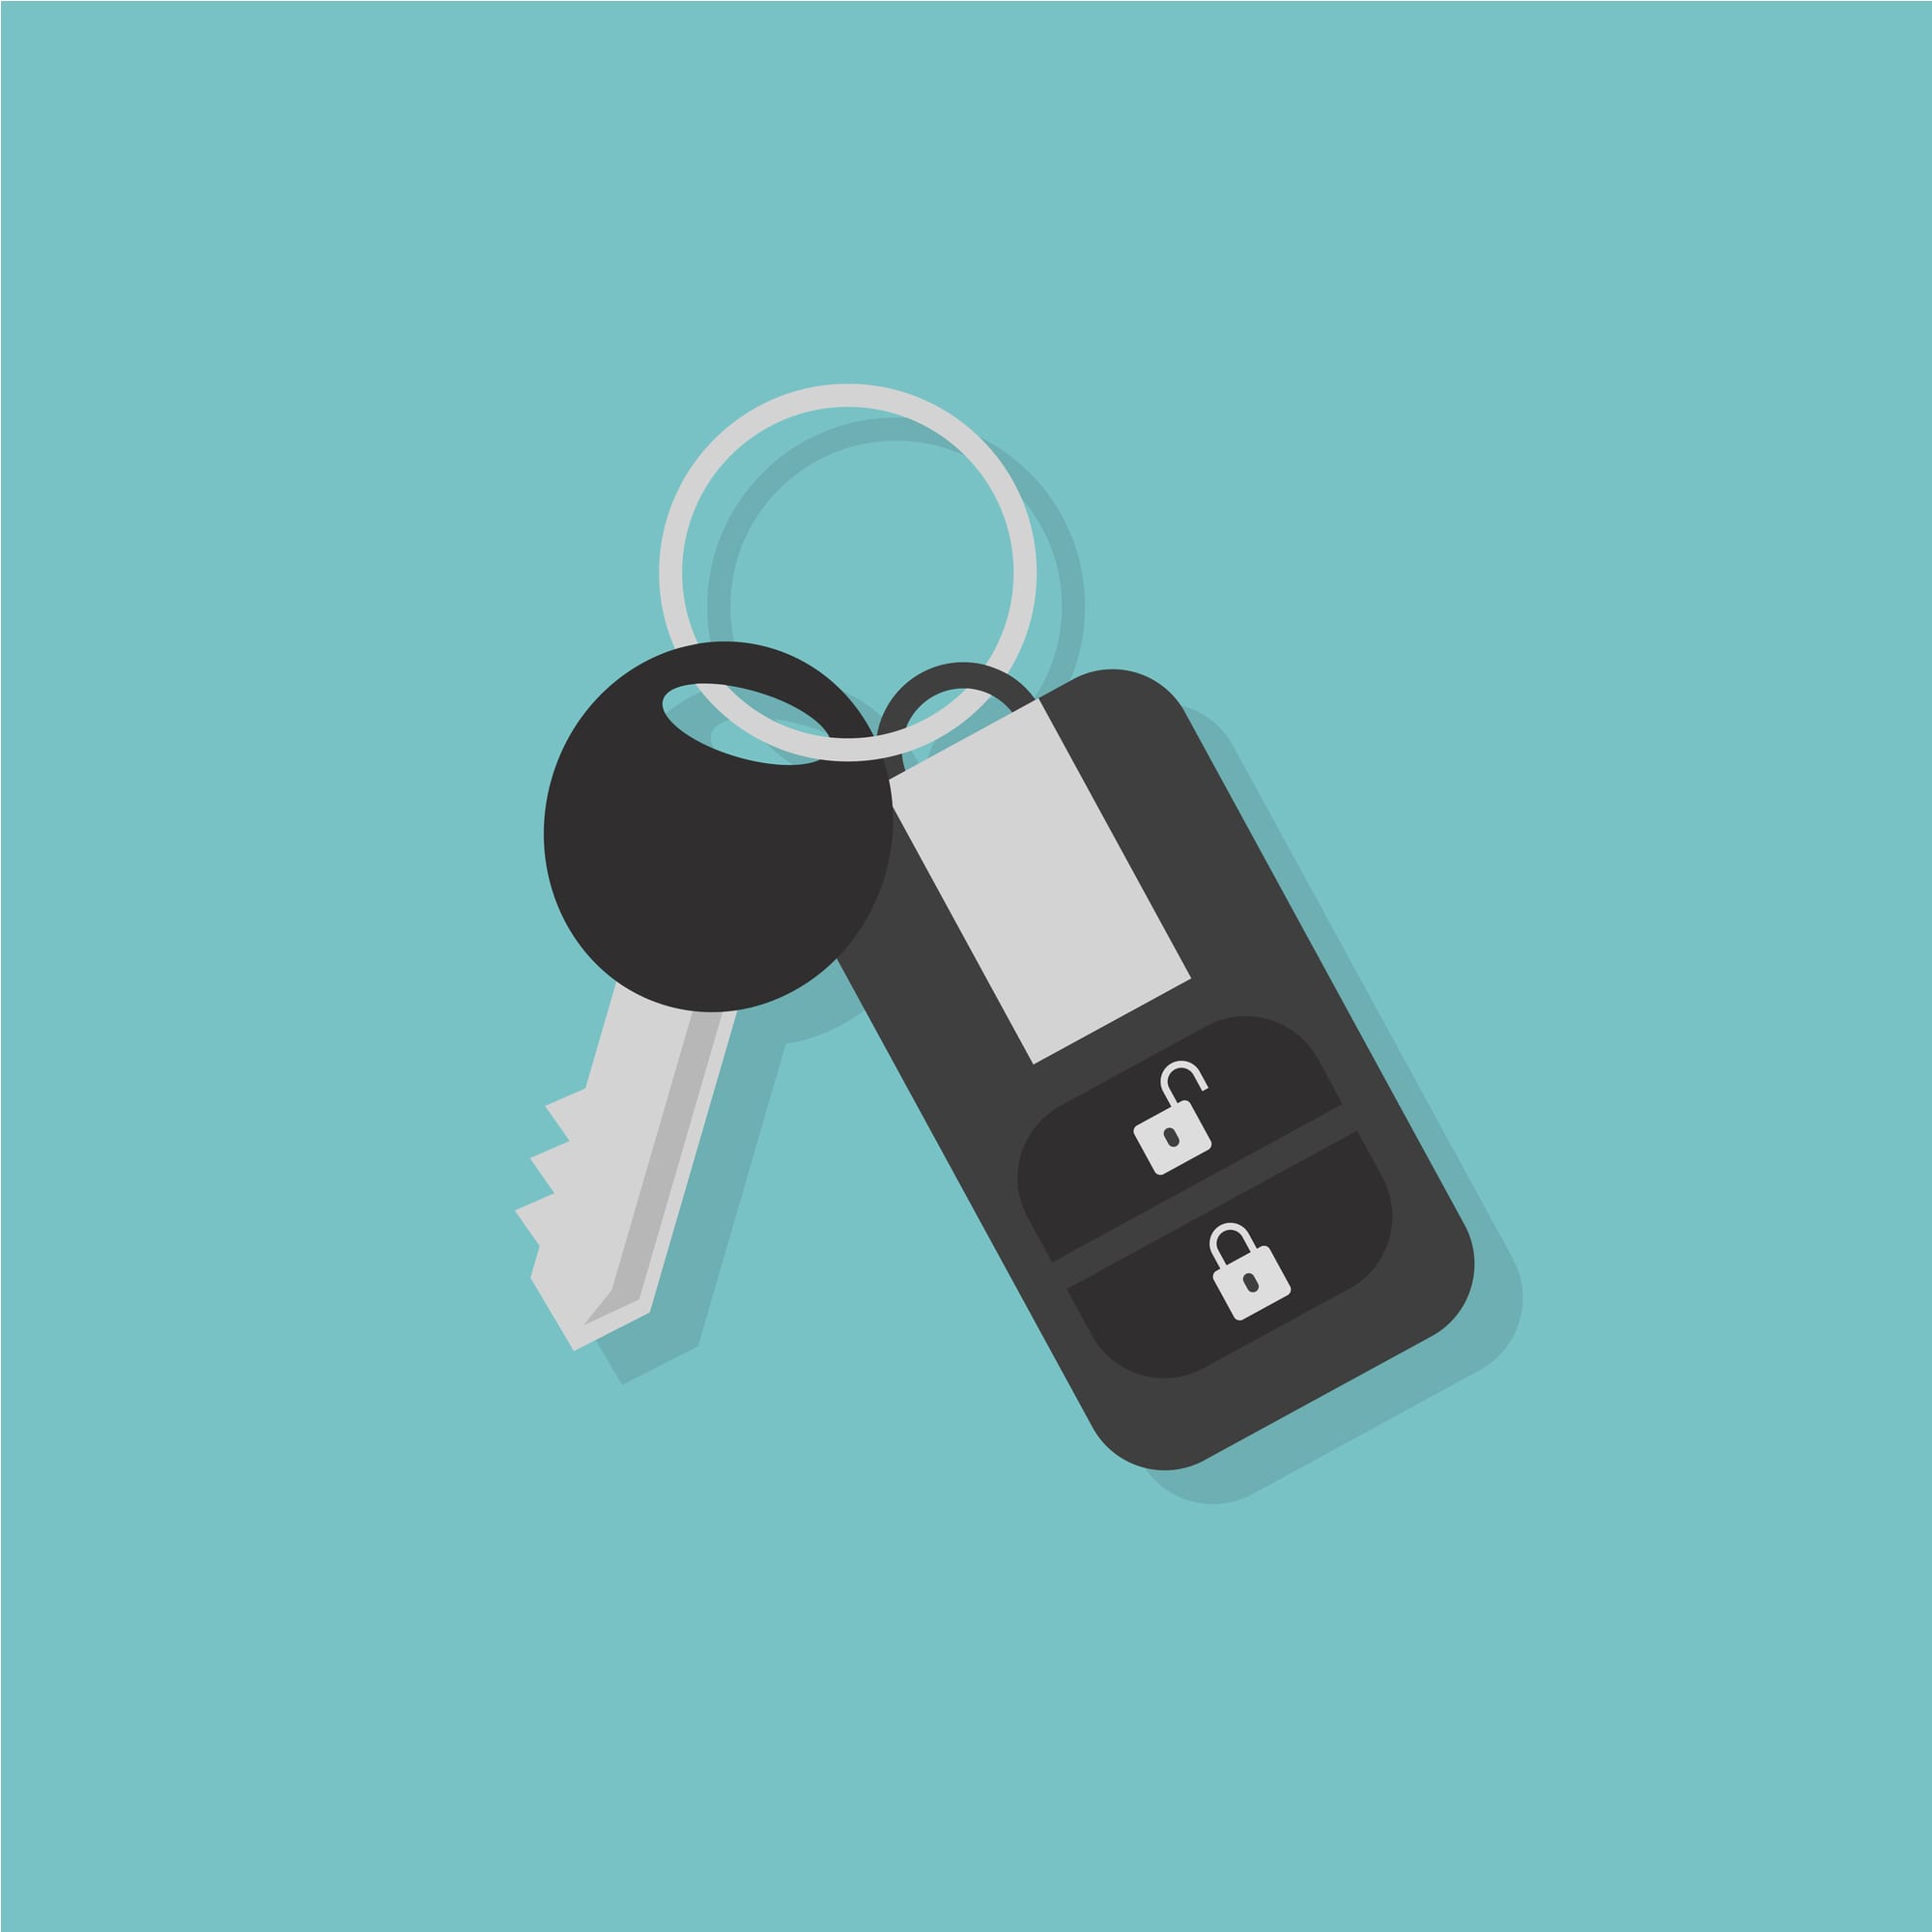 5 Reasons Why You Need a Key Fob Cover for Your Car, by Timotheus